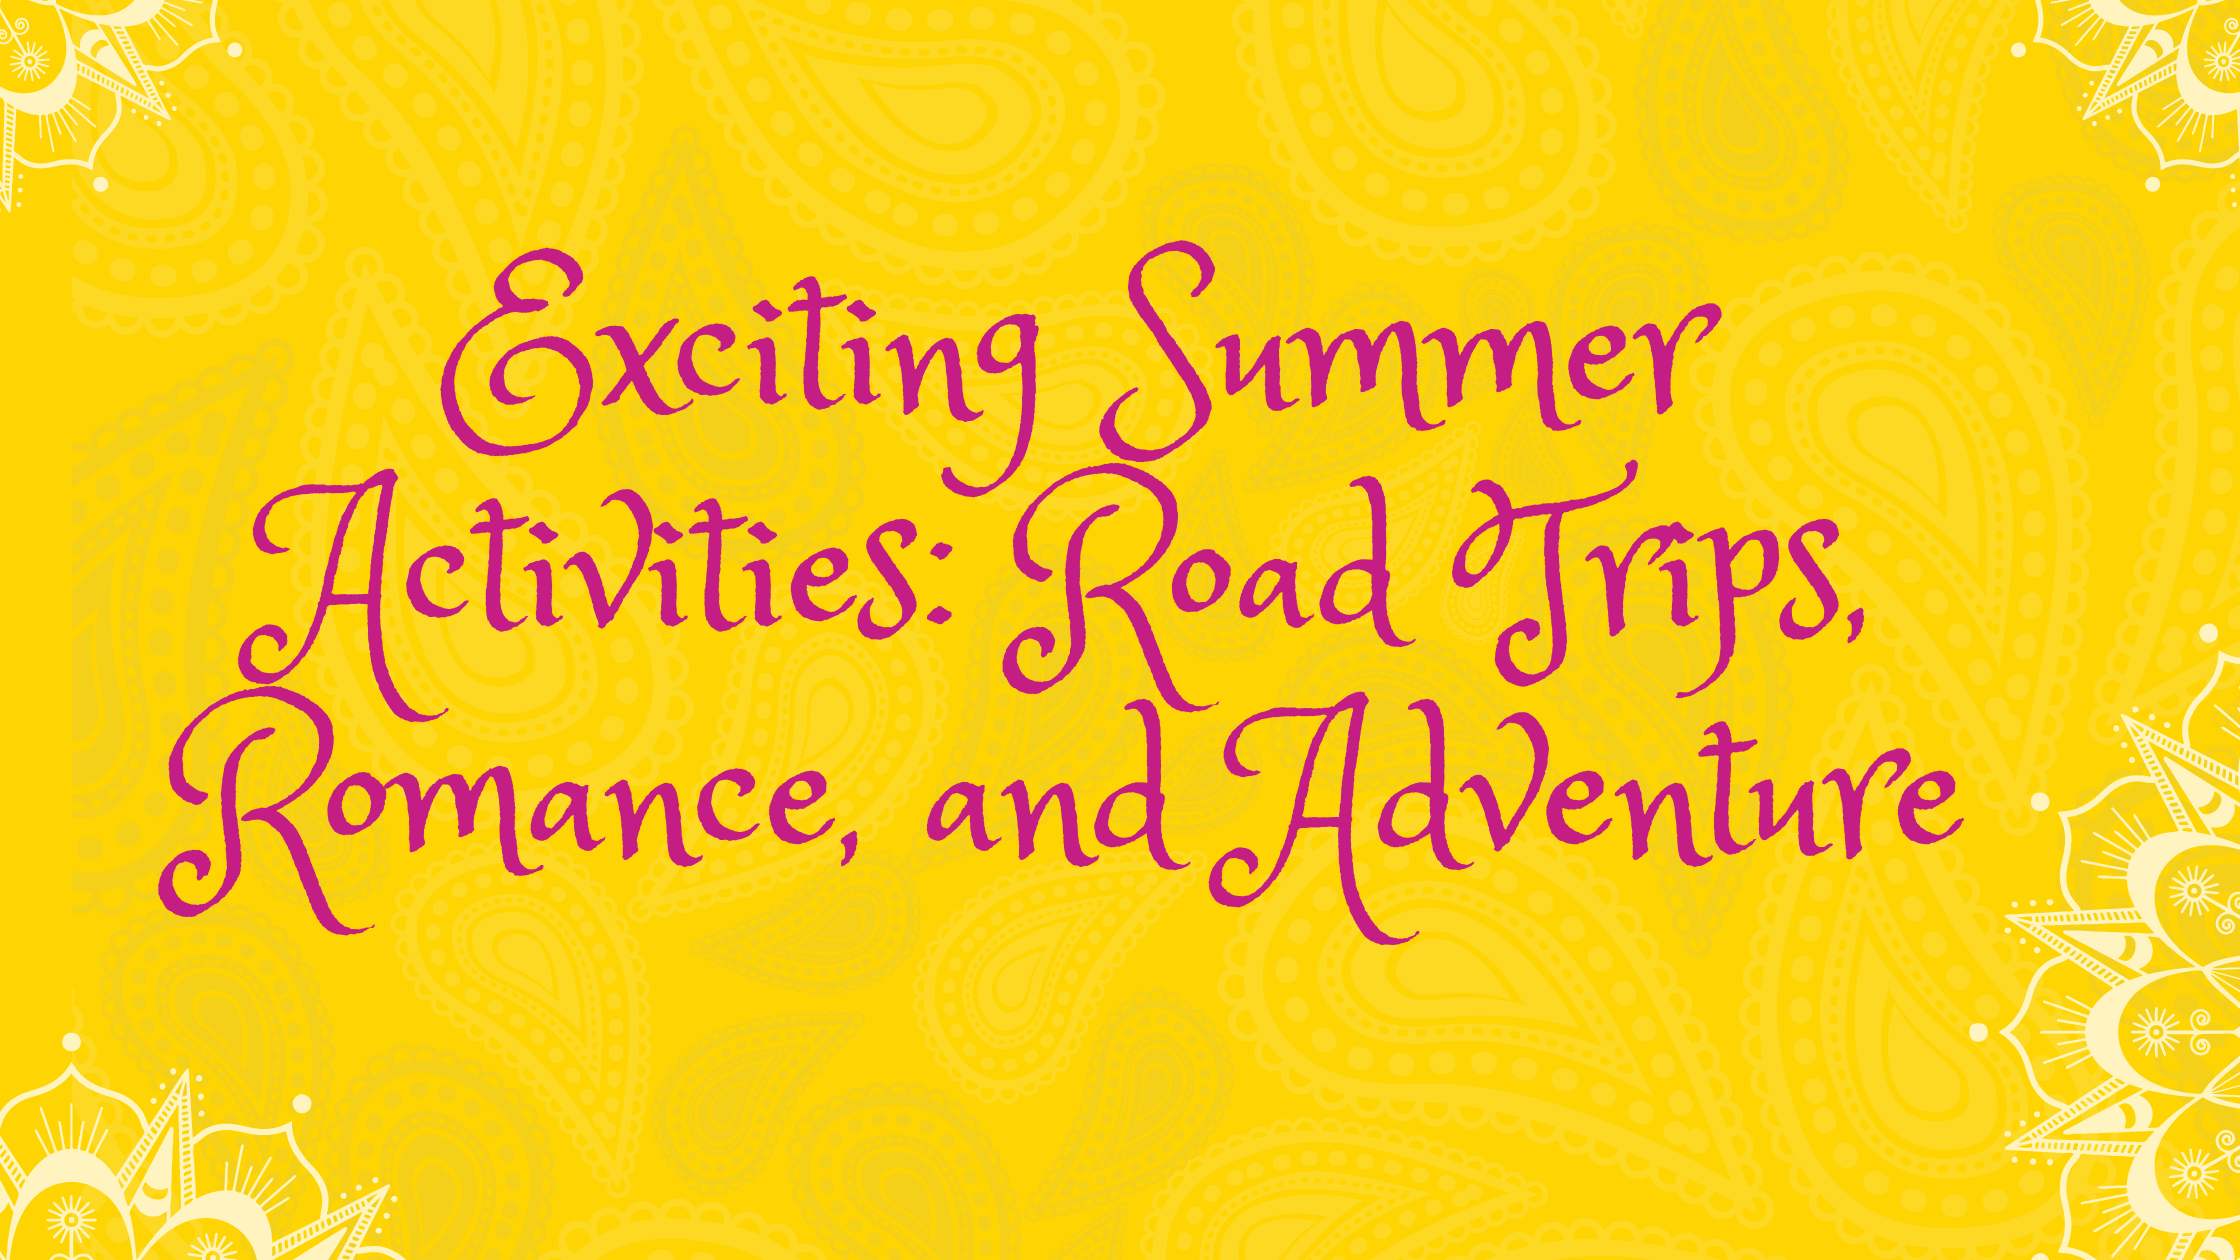 Exciting Summer Activities: Road Trips, Romance, and Adventure